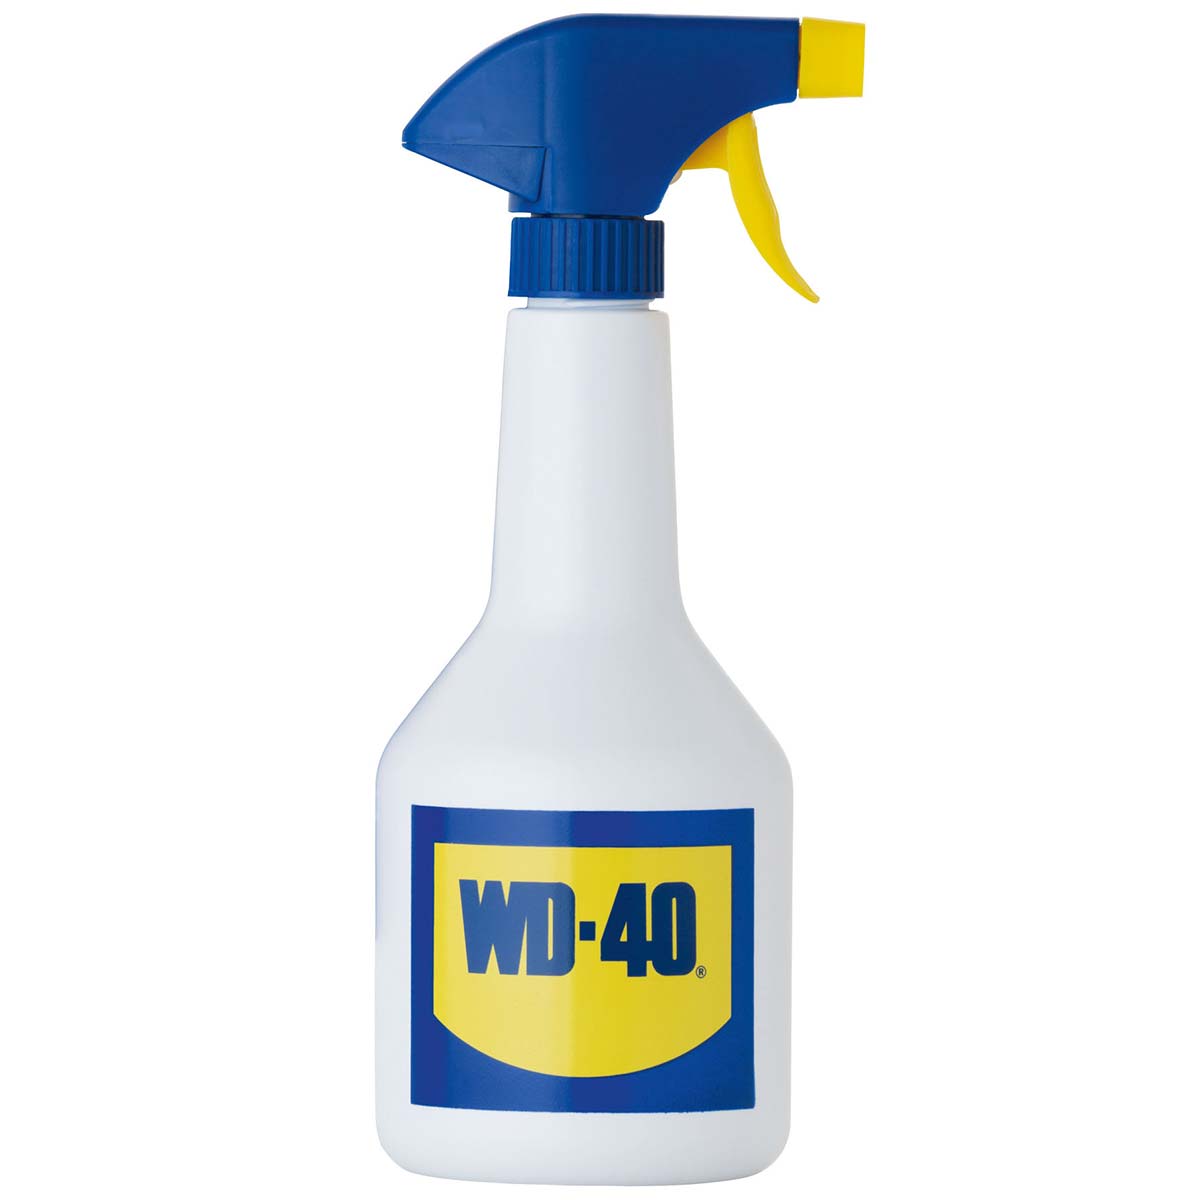 WD-40 multifunctional product Atomizer